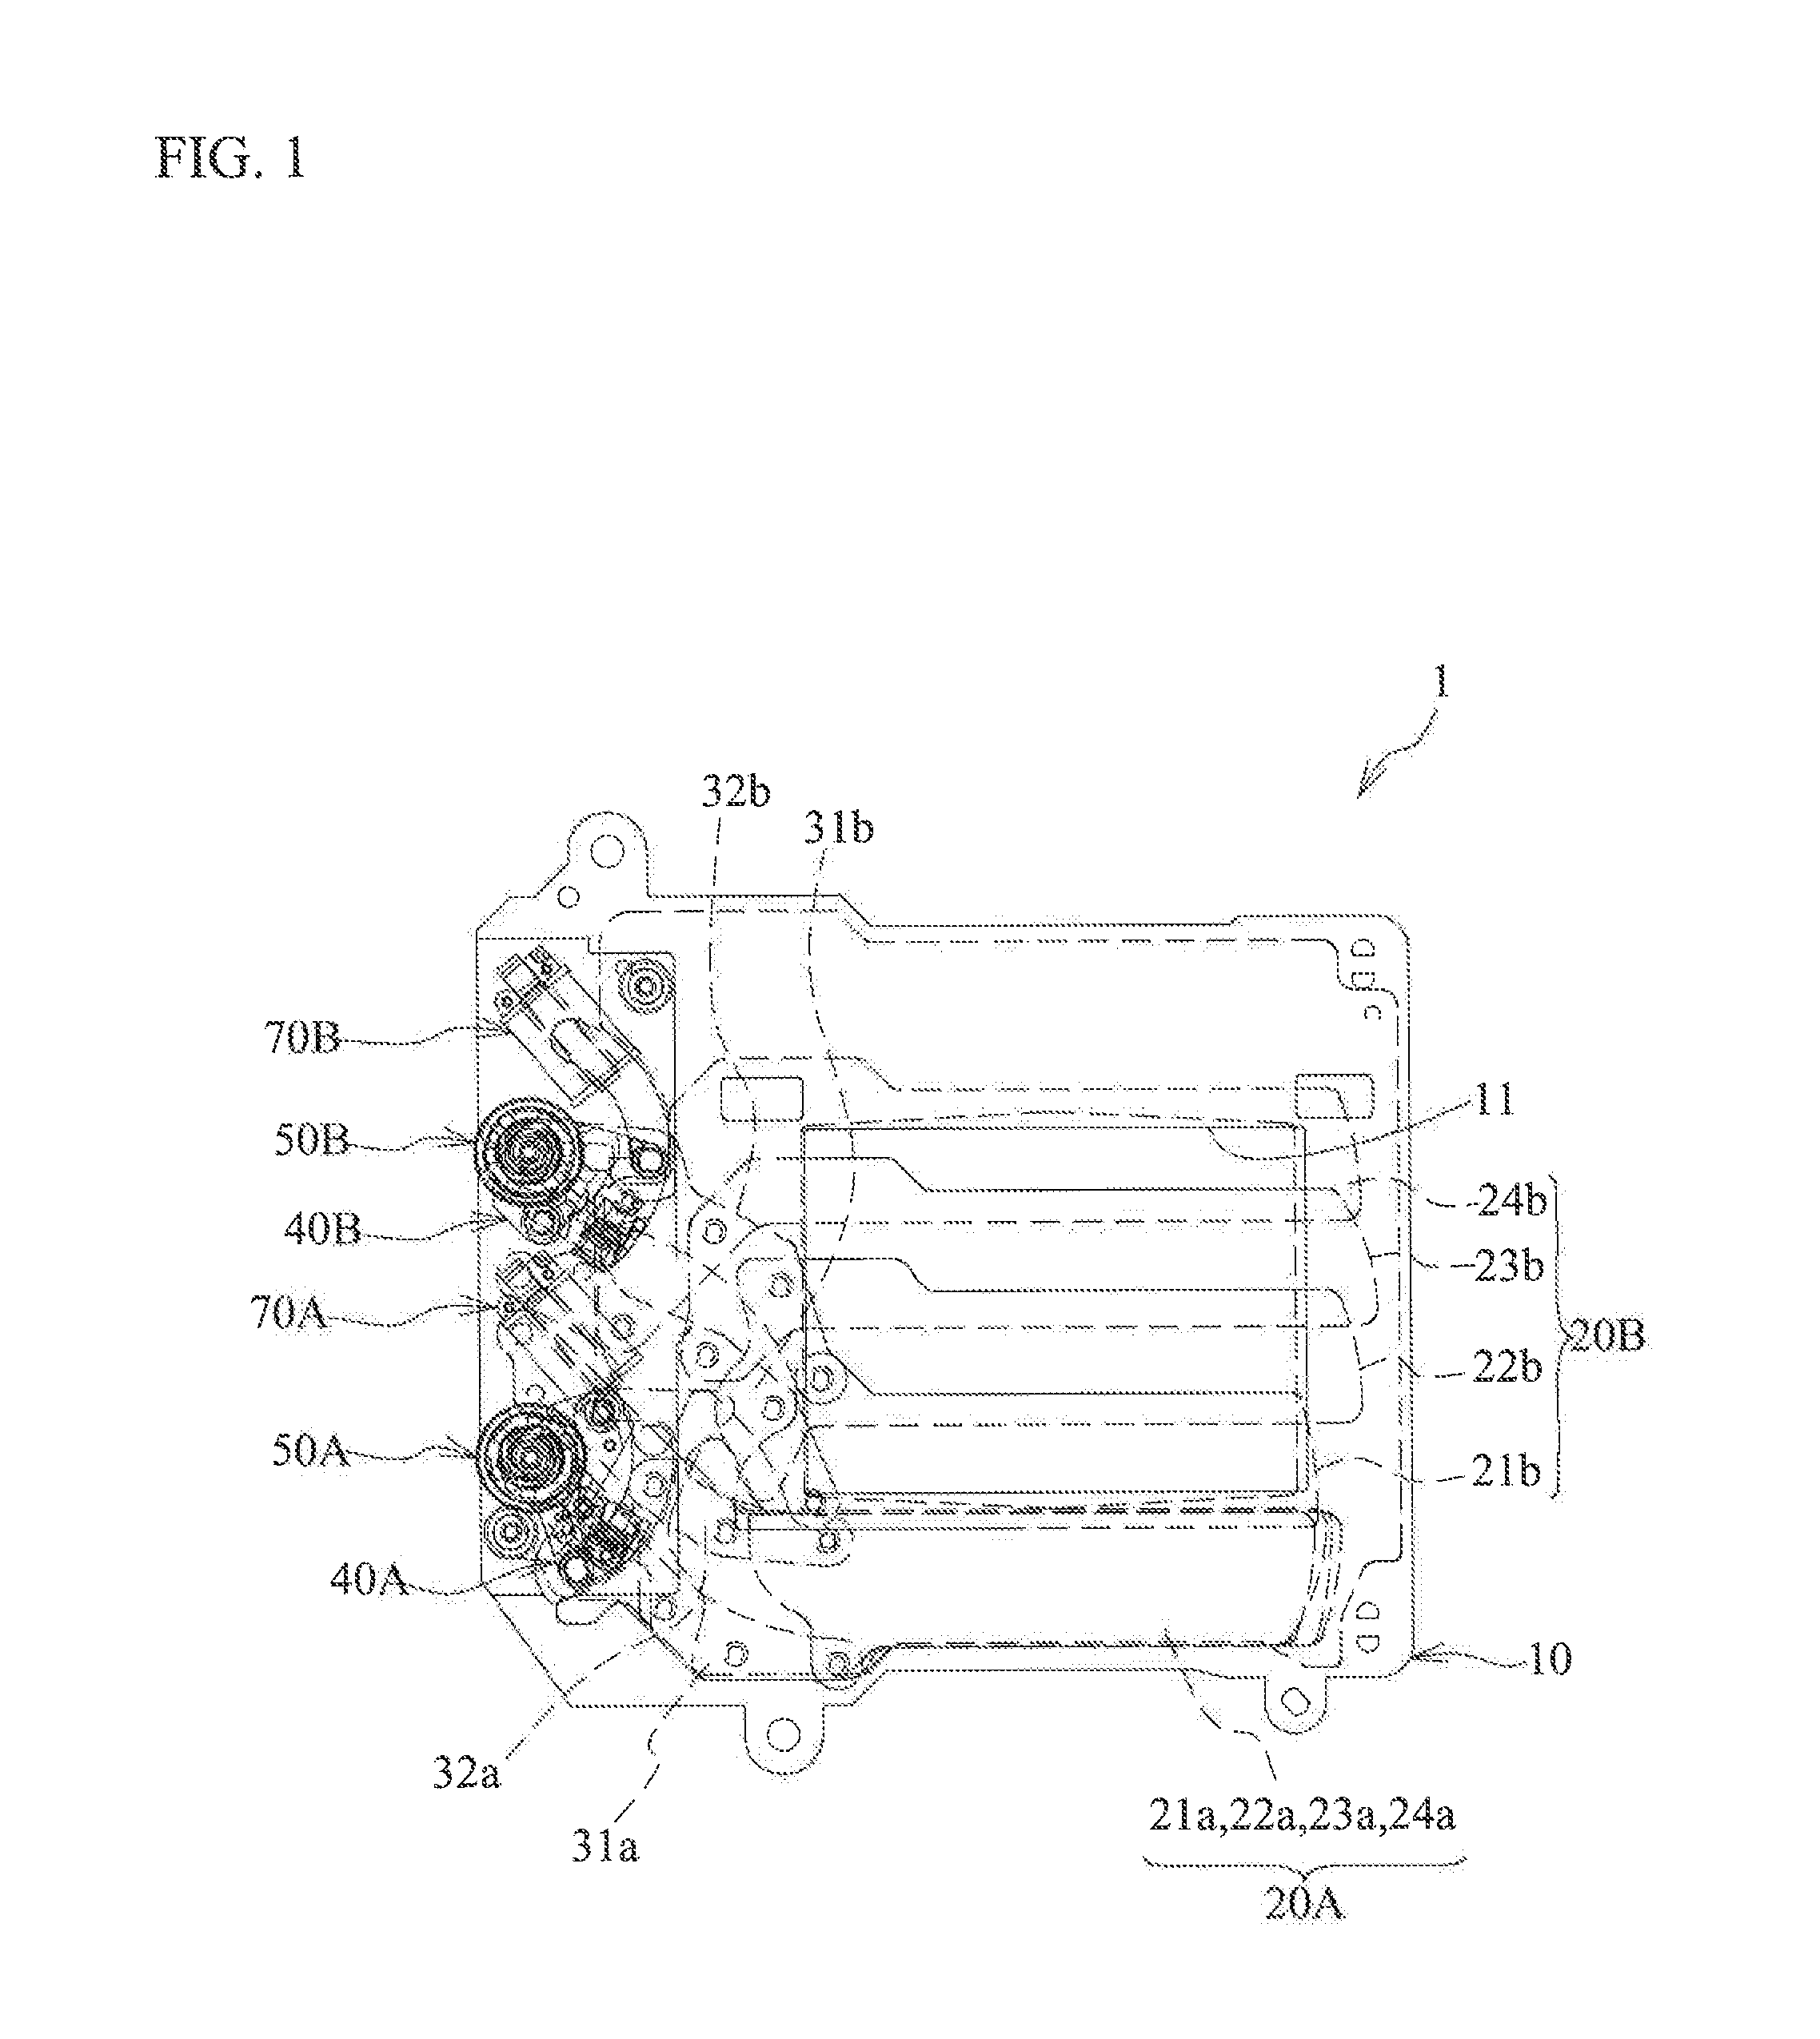 Focal plane shutter and optical apparatus